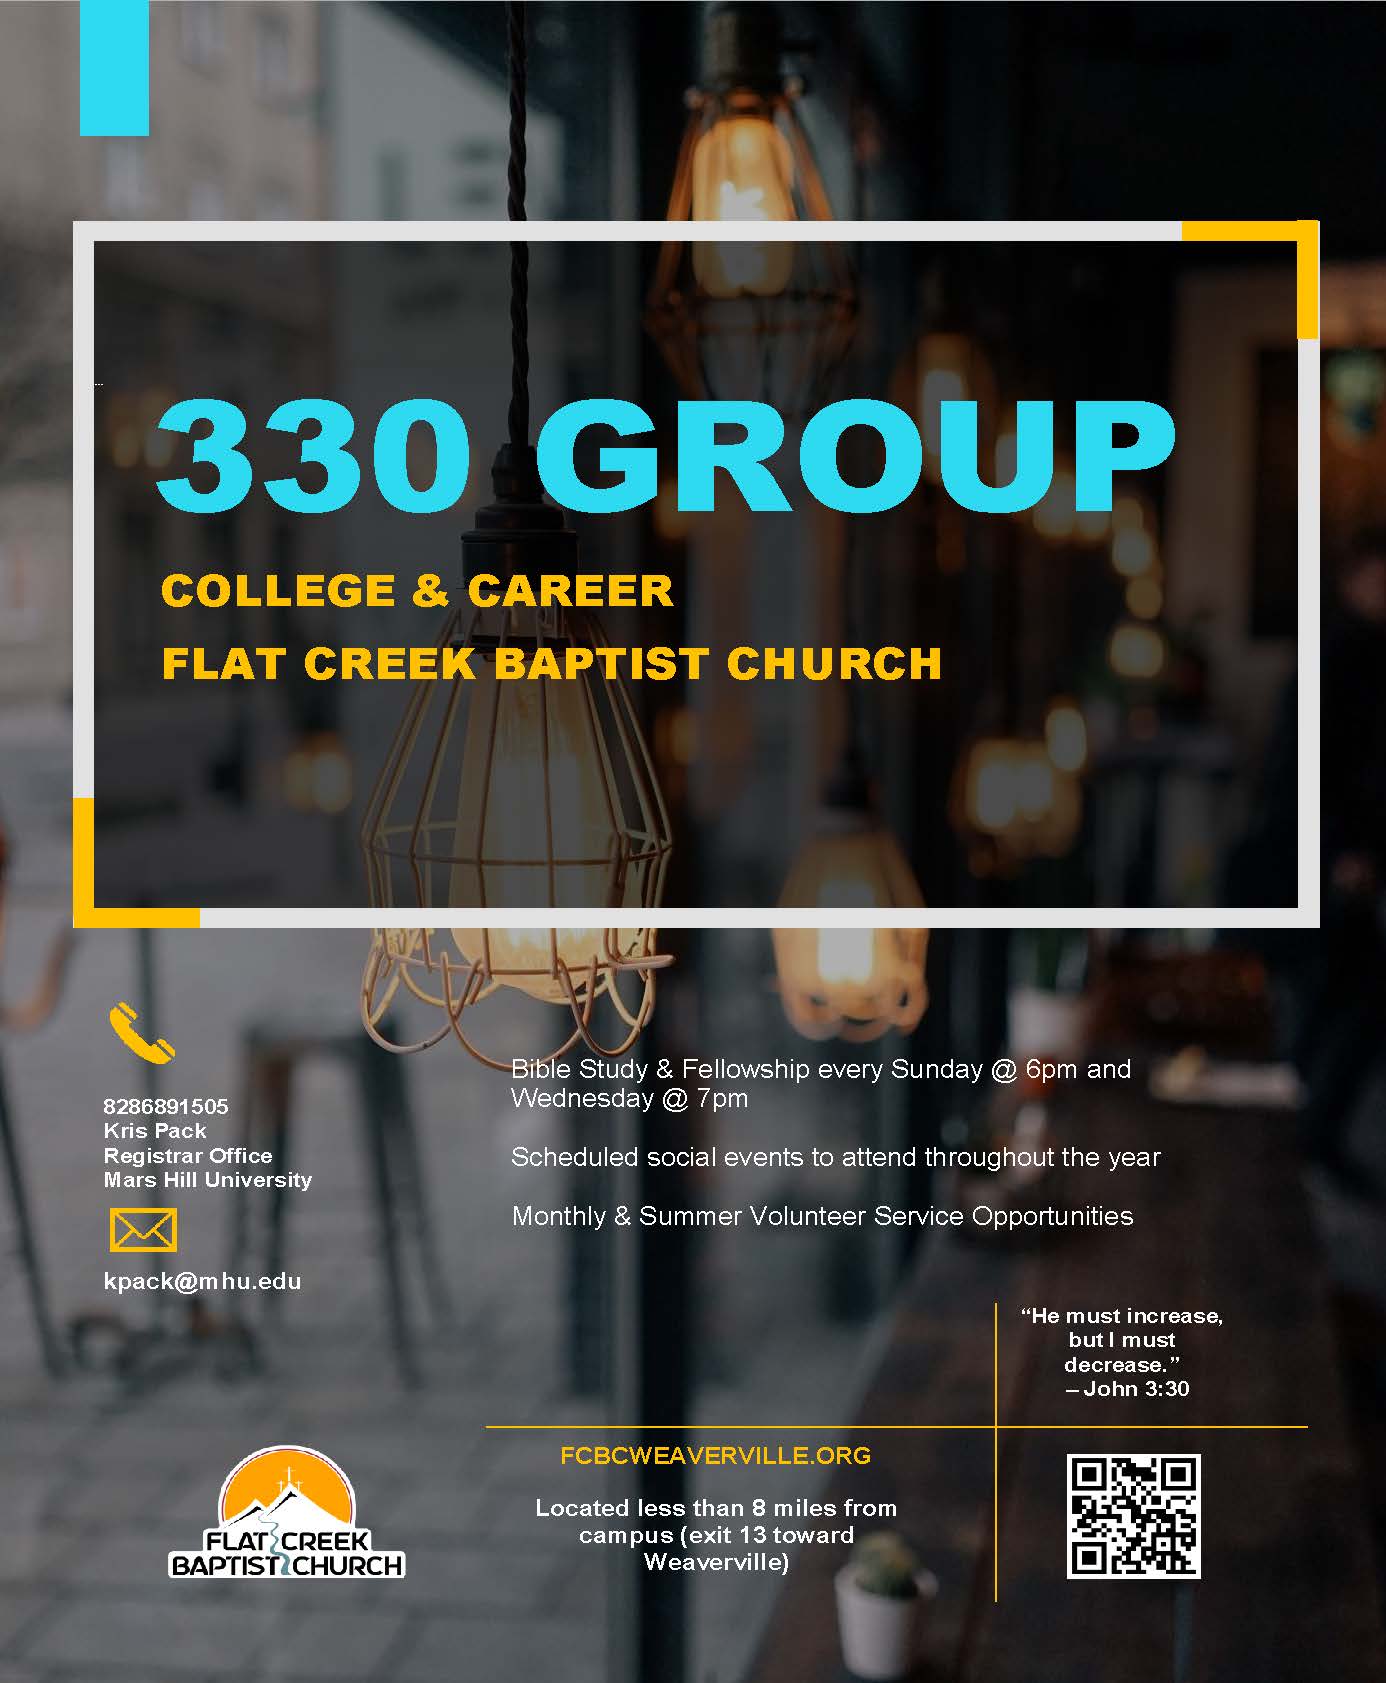 Bible study, Fun, Fellowship, Service Volunteer Opportunities @ Flat Creek Baptist Church 21 Flat Creek Church Rd, Weaverville - See flyer for days and times and scan qr code for more info